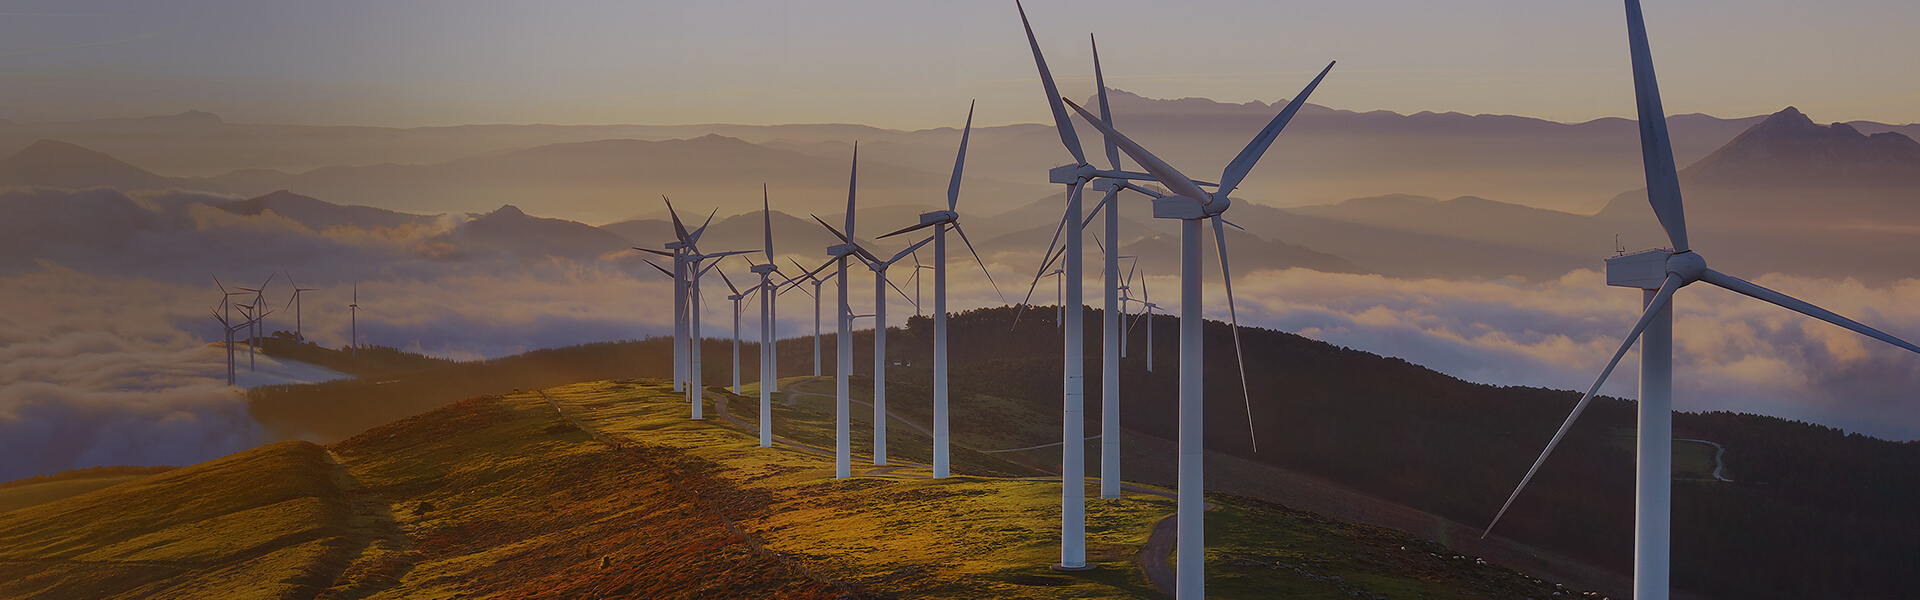 an image to show wind turbines for cleantech and renewable energy